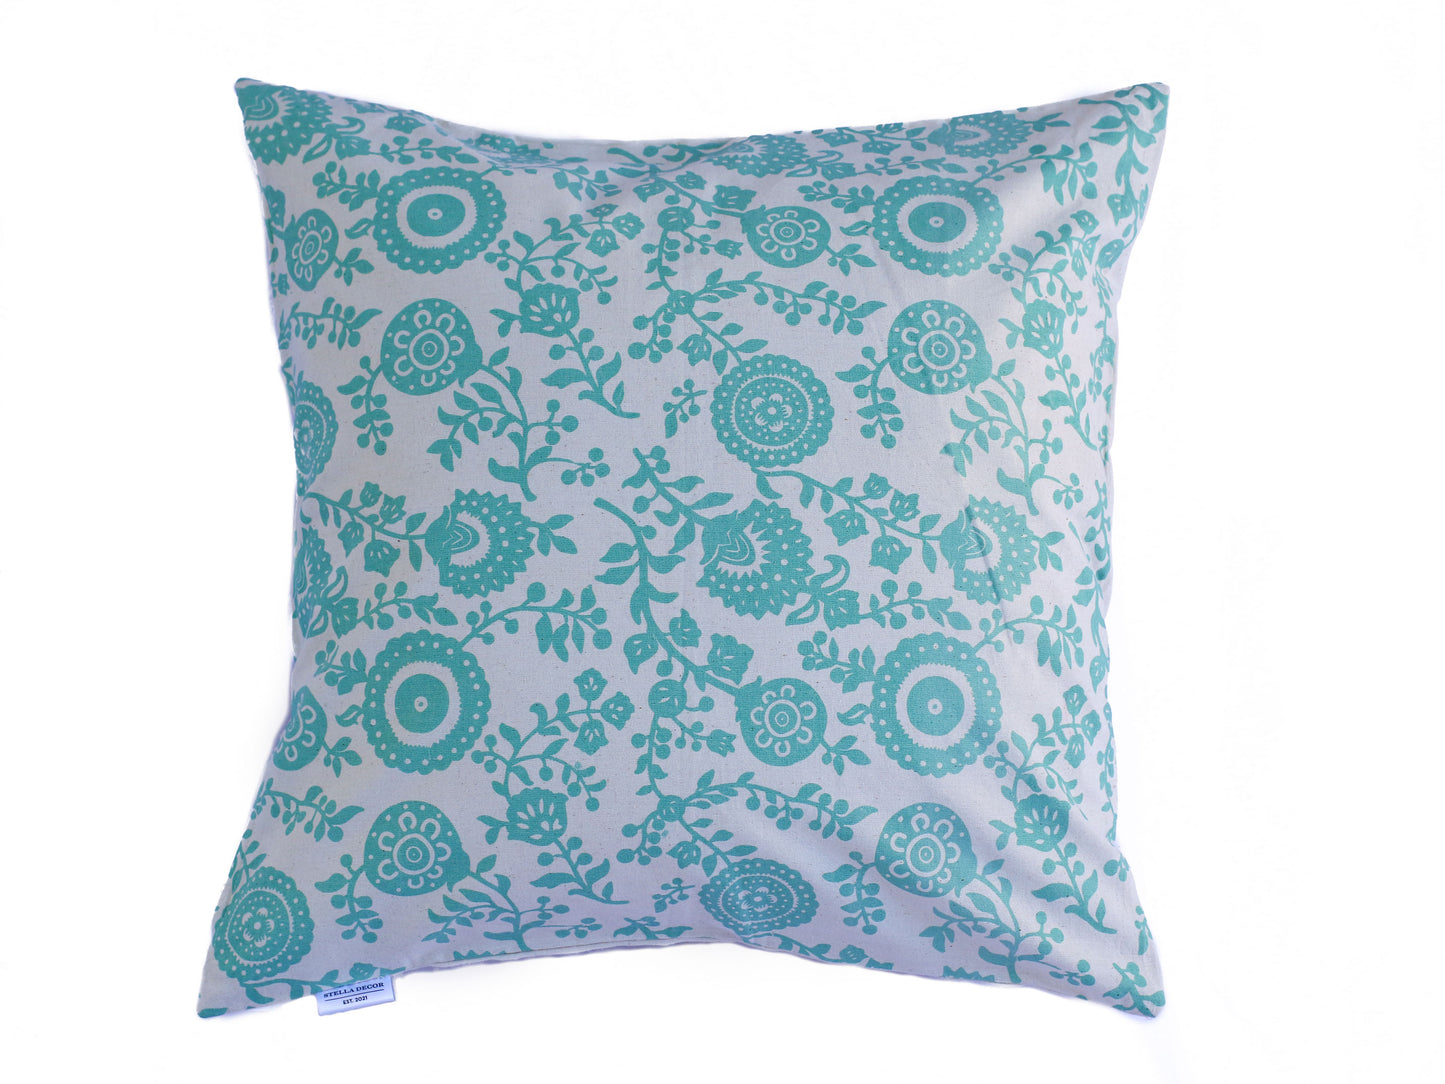 Stella Decor cushion cover design of chrysanthemum flower in size 50x50 cm in color turquoise original